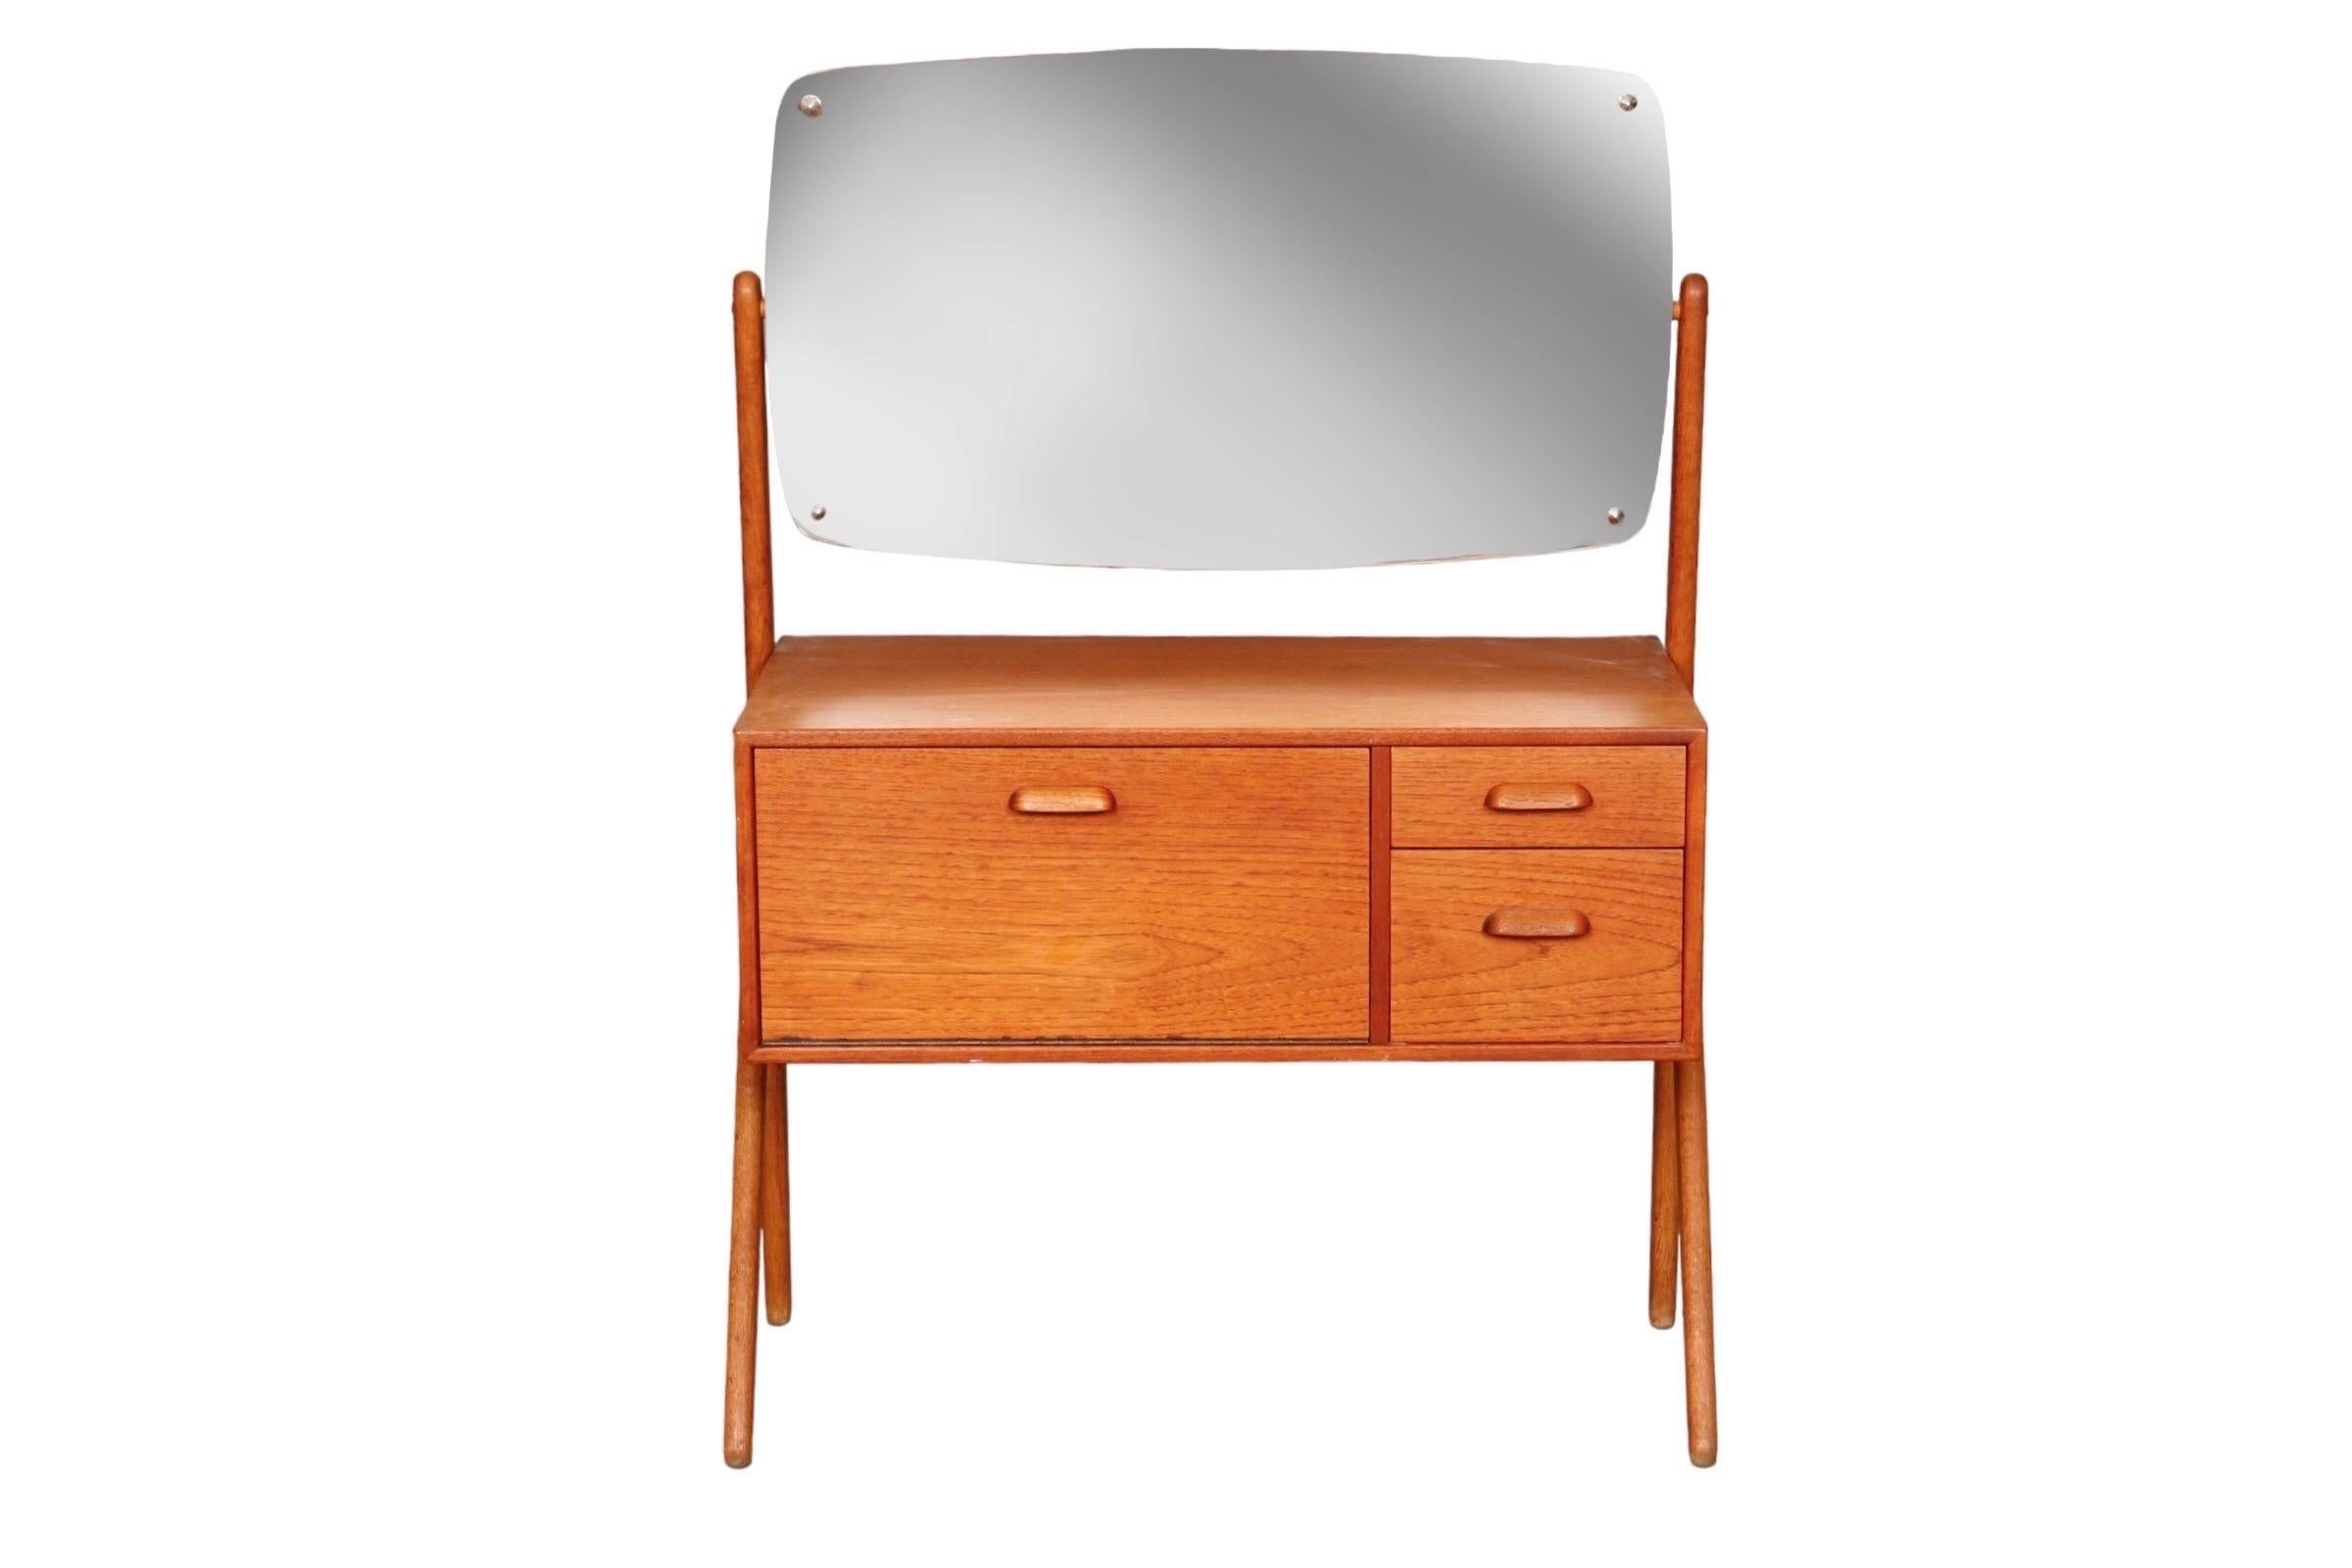 A 1960’s Y-leg vanity with mirror made of teak. Designed by Sigfred Omann and manufactured by Olholm Mobelfabrik of Denmark. A fall front cabinet to the left and two dovetailed drawers to the right open with recessed handles.

W27” x D14.5” x Height